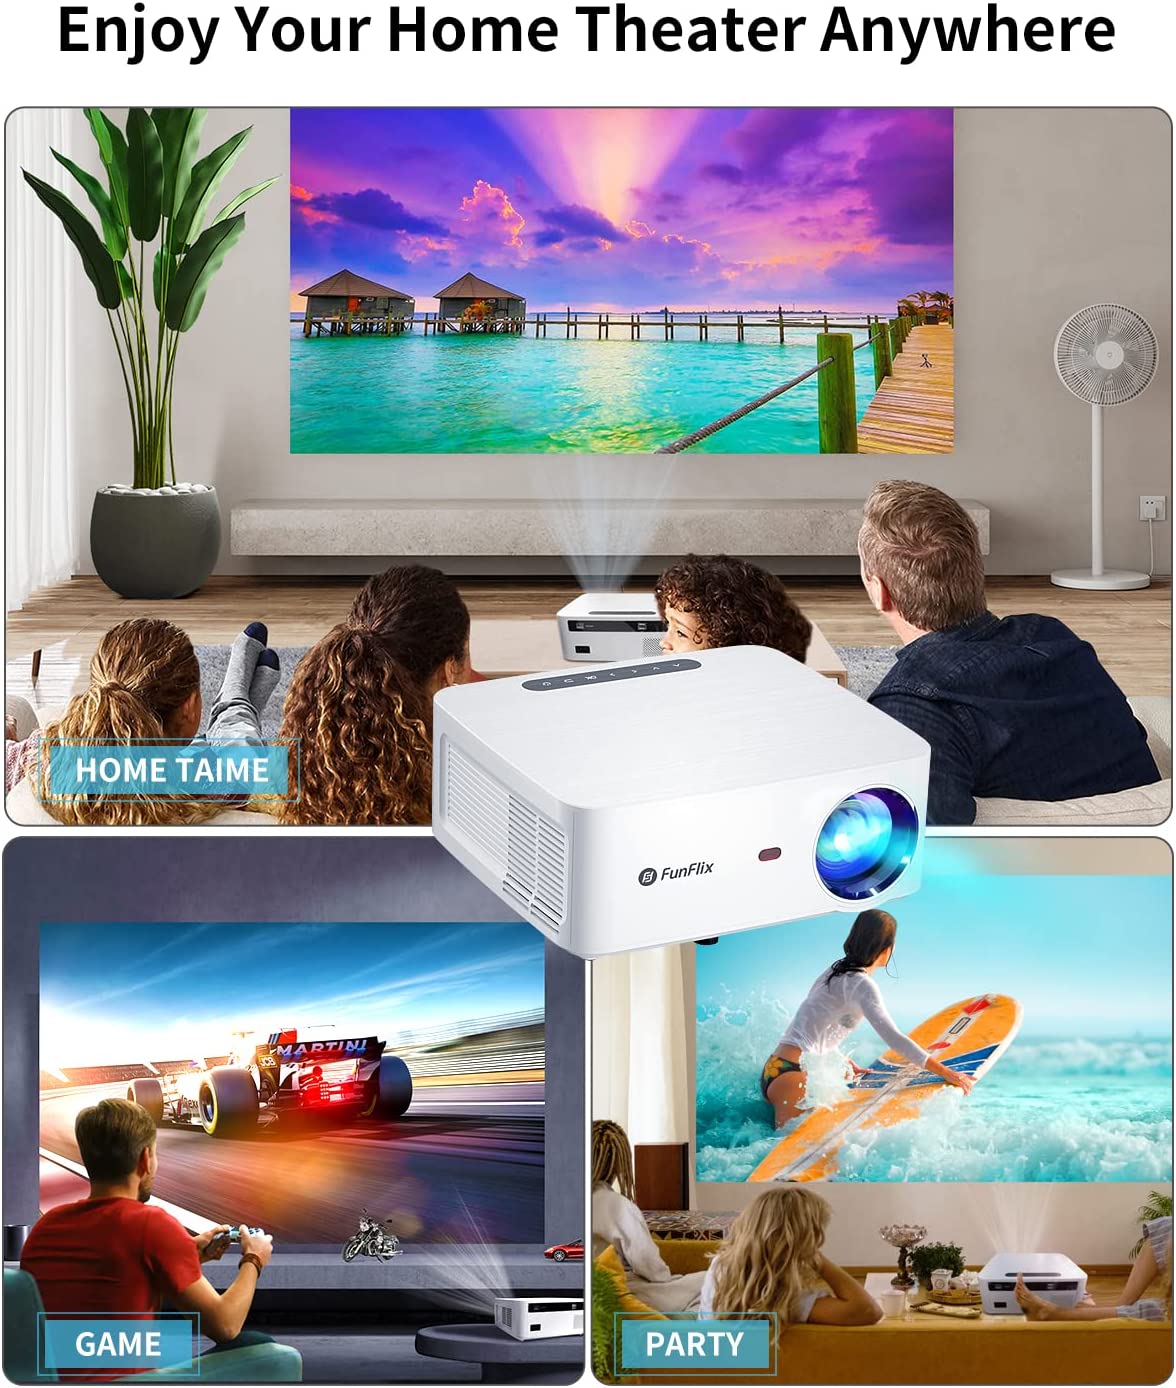 Projector 5G WiFi Bluetooth Full HD Native 1080P Home Cinema 4P Keystone Correction Compatible with iOS/Android/TV Stick/HDMI/USB/PS5